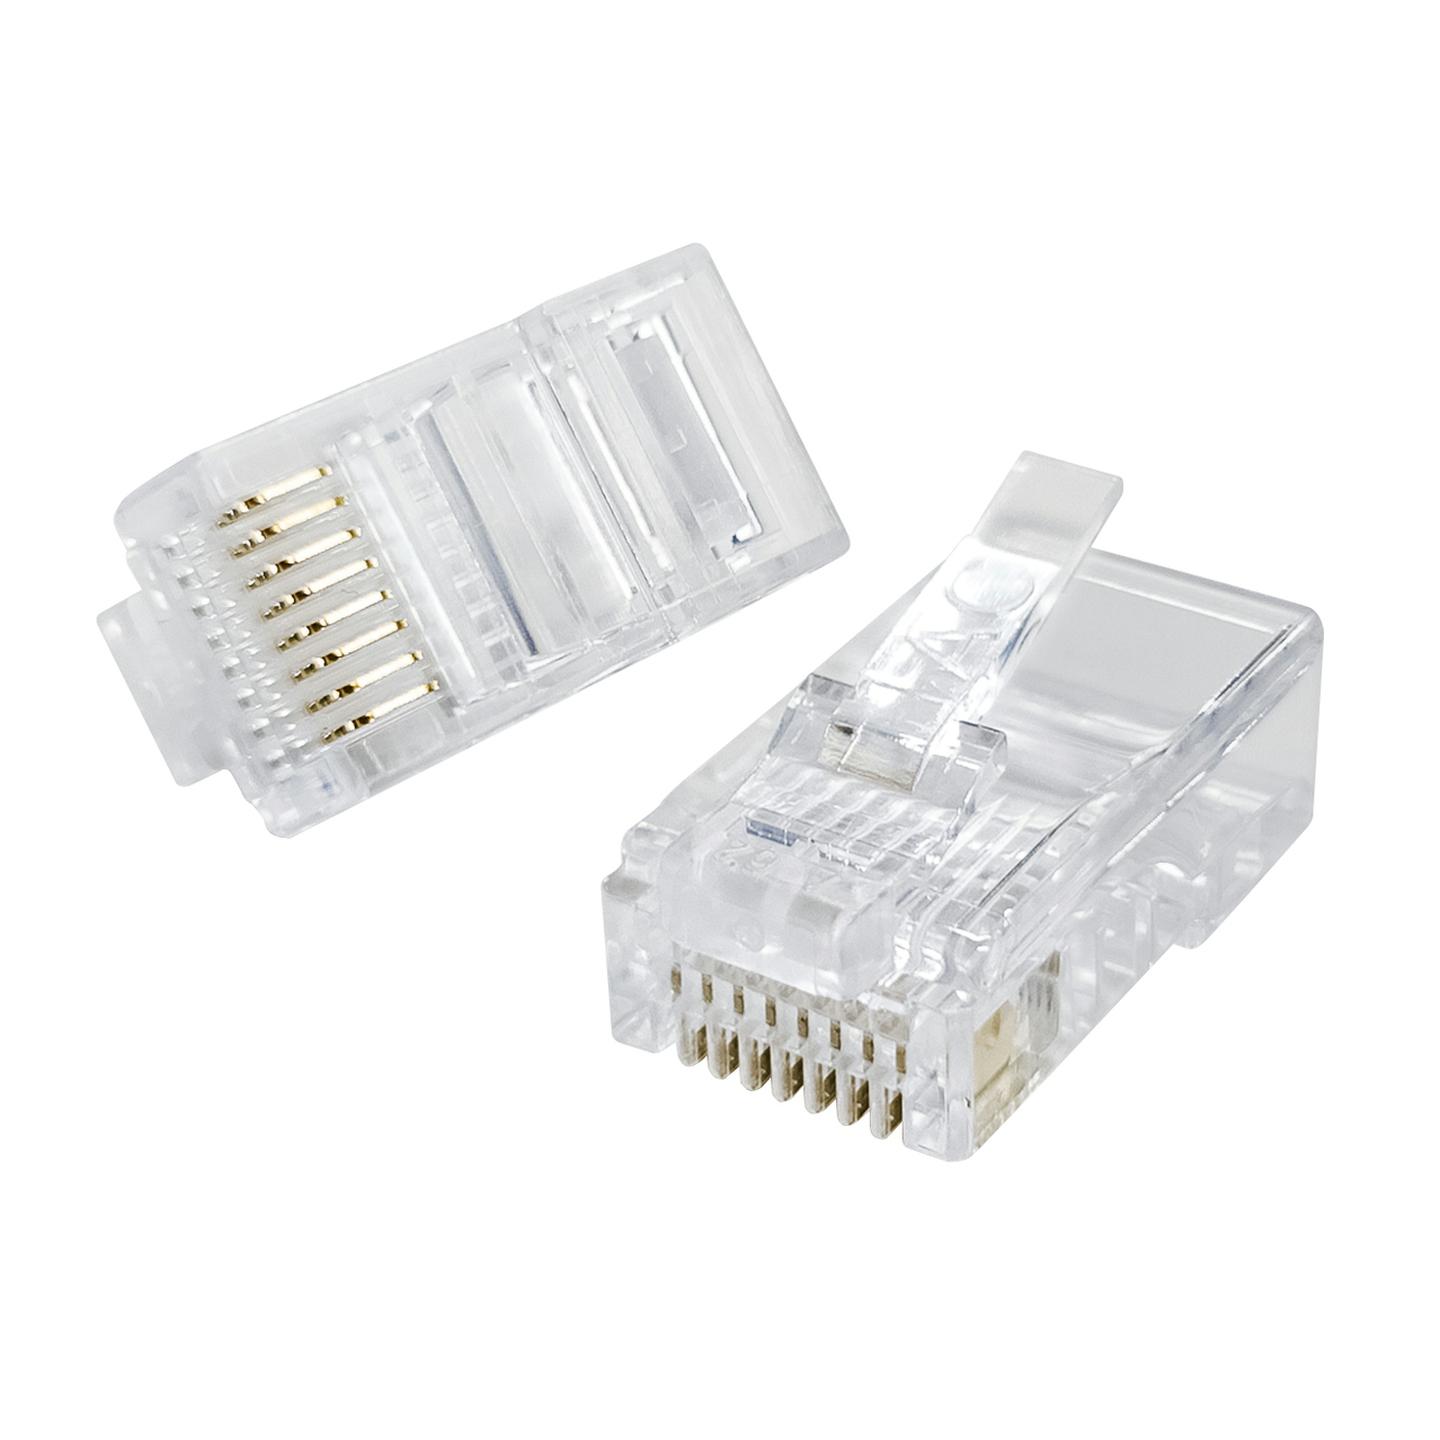 8 Pin US Type Telephone Plugs for Stranded Cable - Pack of 5